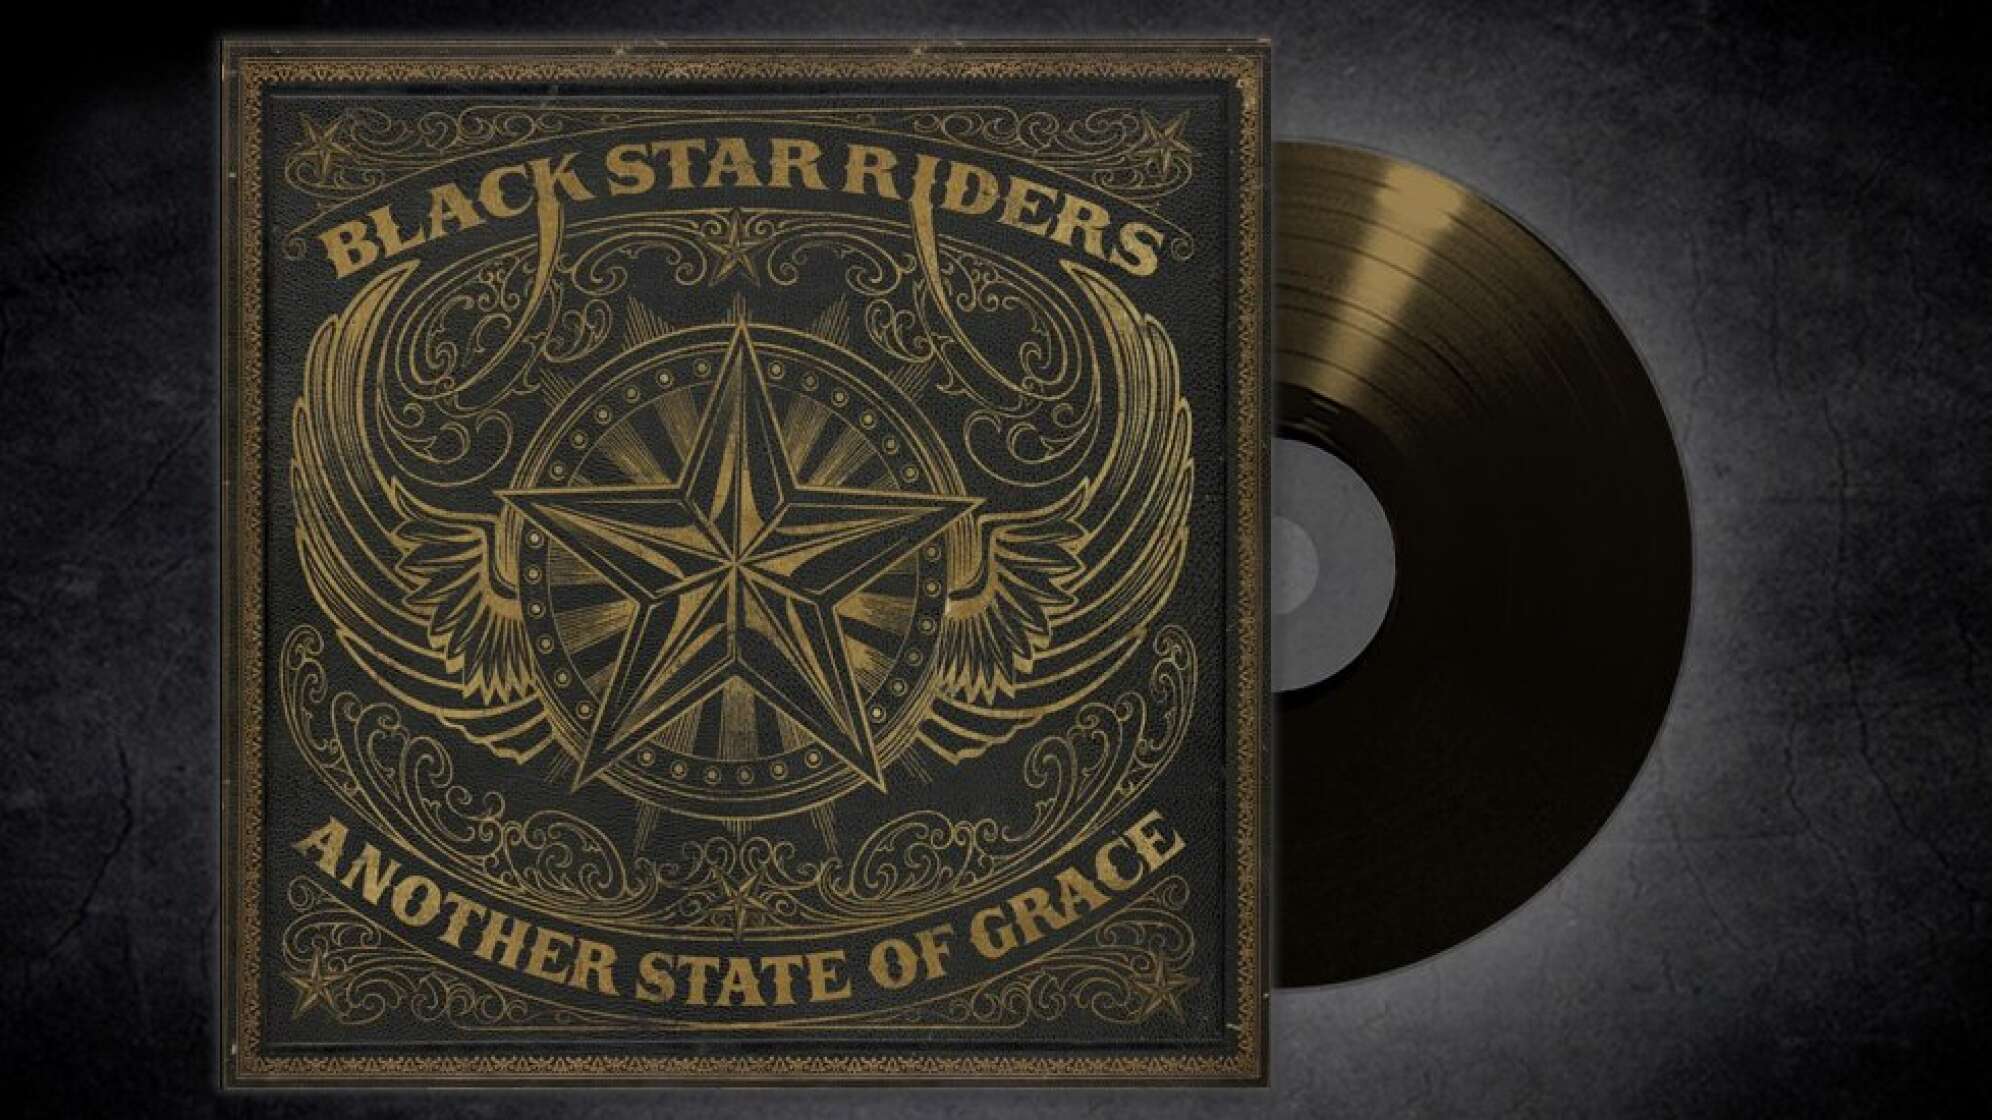 Album-der-Woche: Black Star Riders - Another State Of Grace